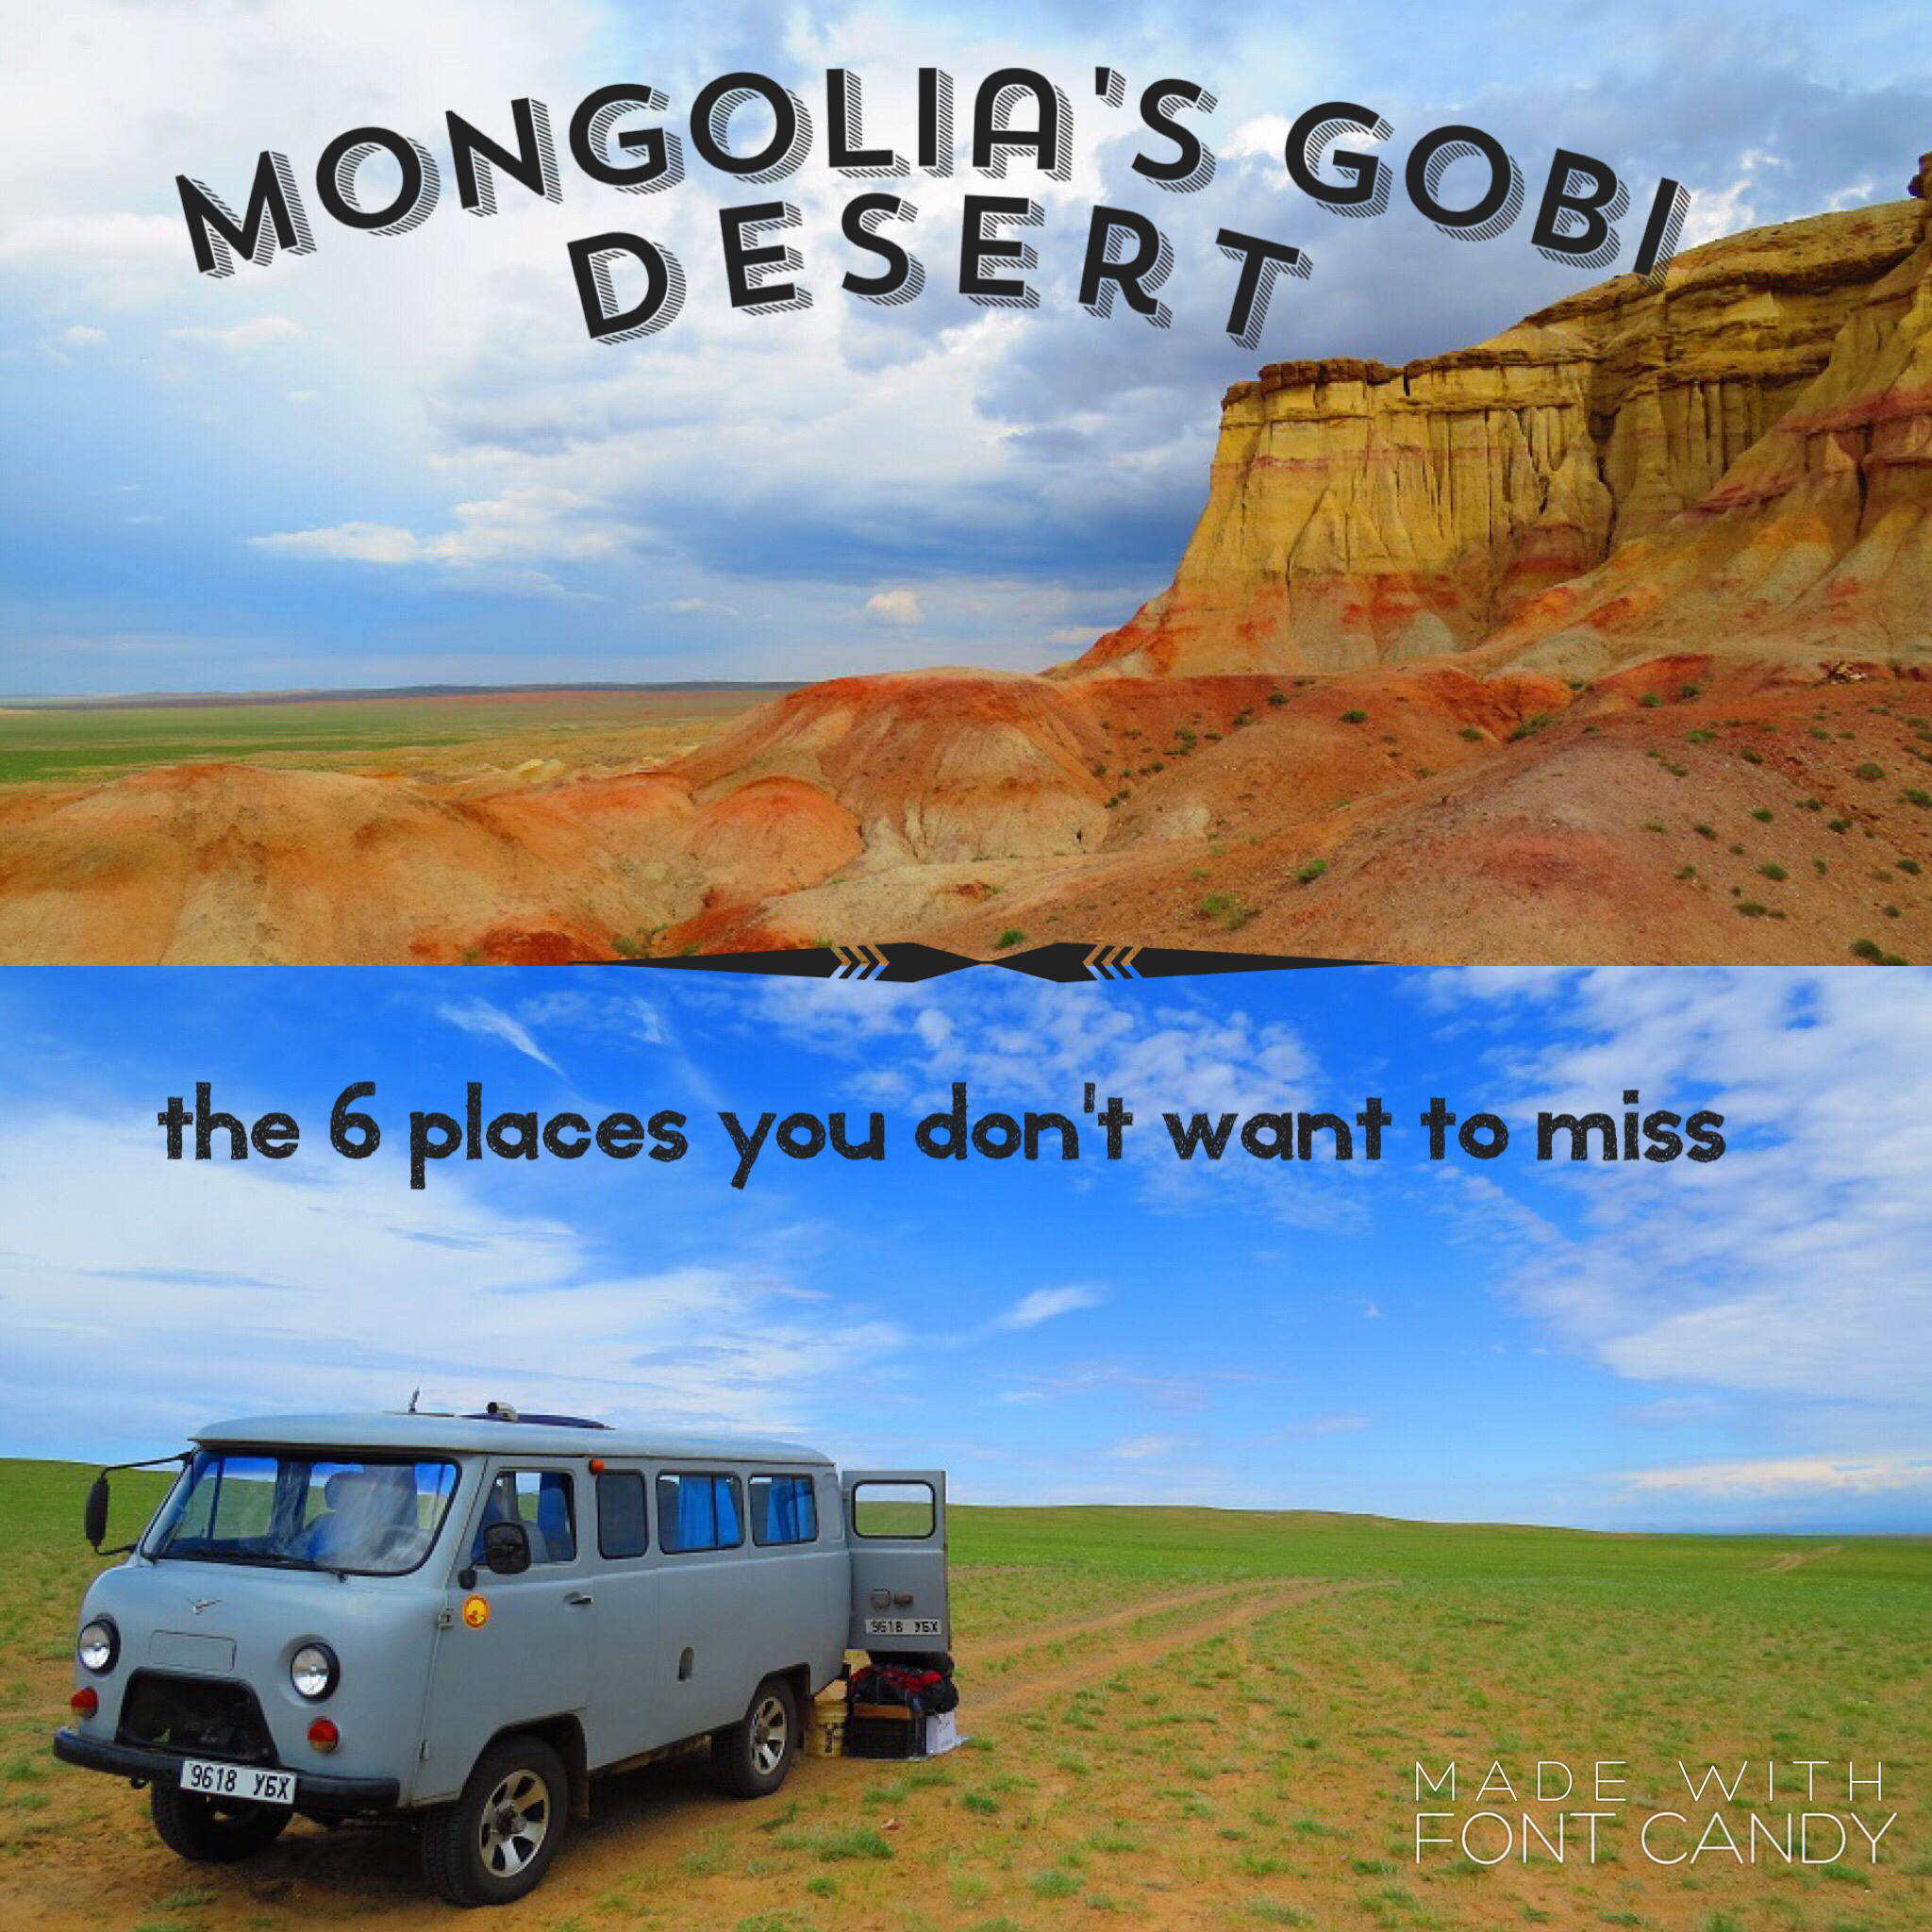 Mongolia's Gobi Desert Top 6 places you don't want to miss